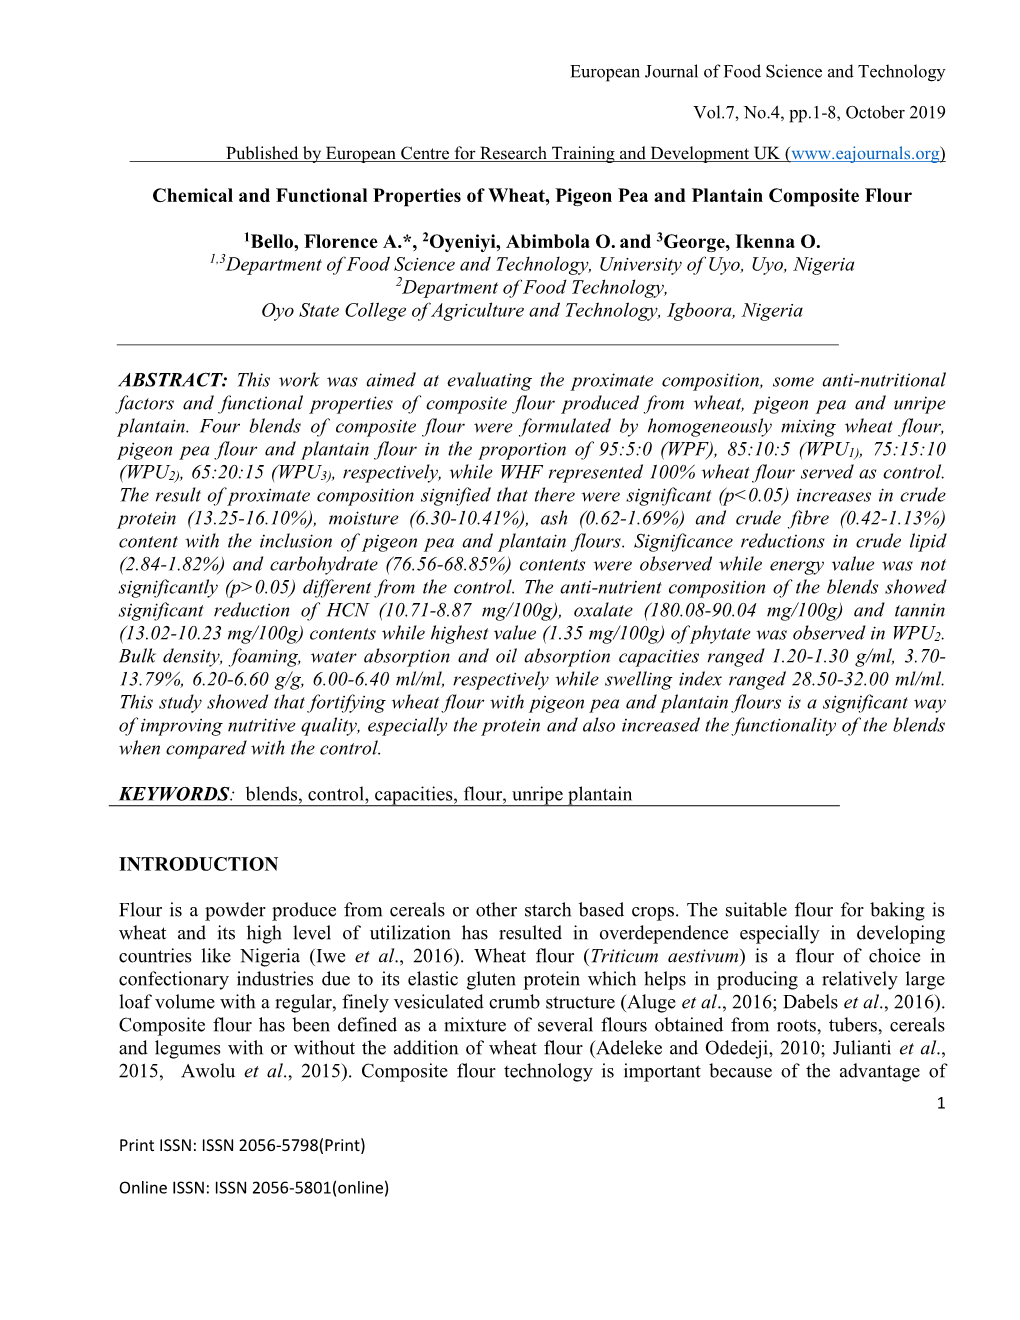 Chemical and Functional Properties of Wheat, Pigeon Pea and Plantain Composite Flour